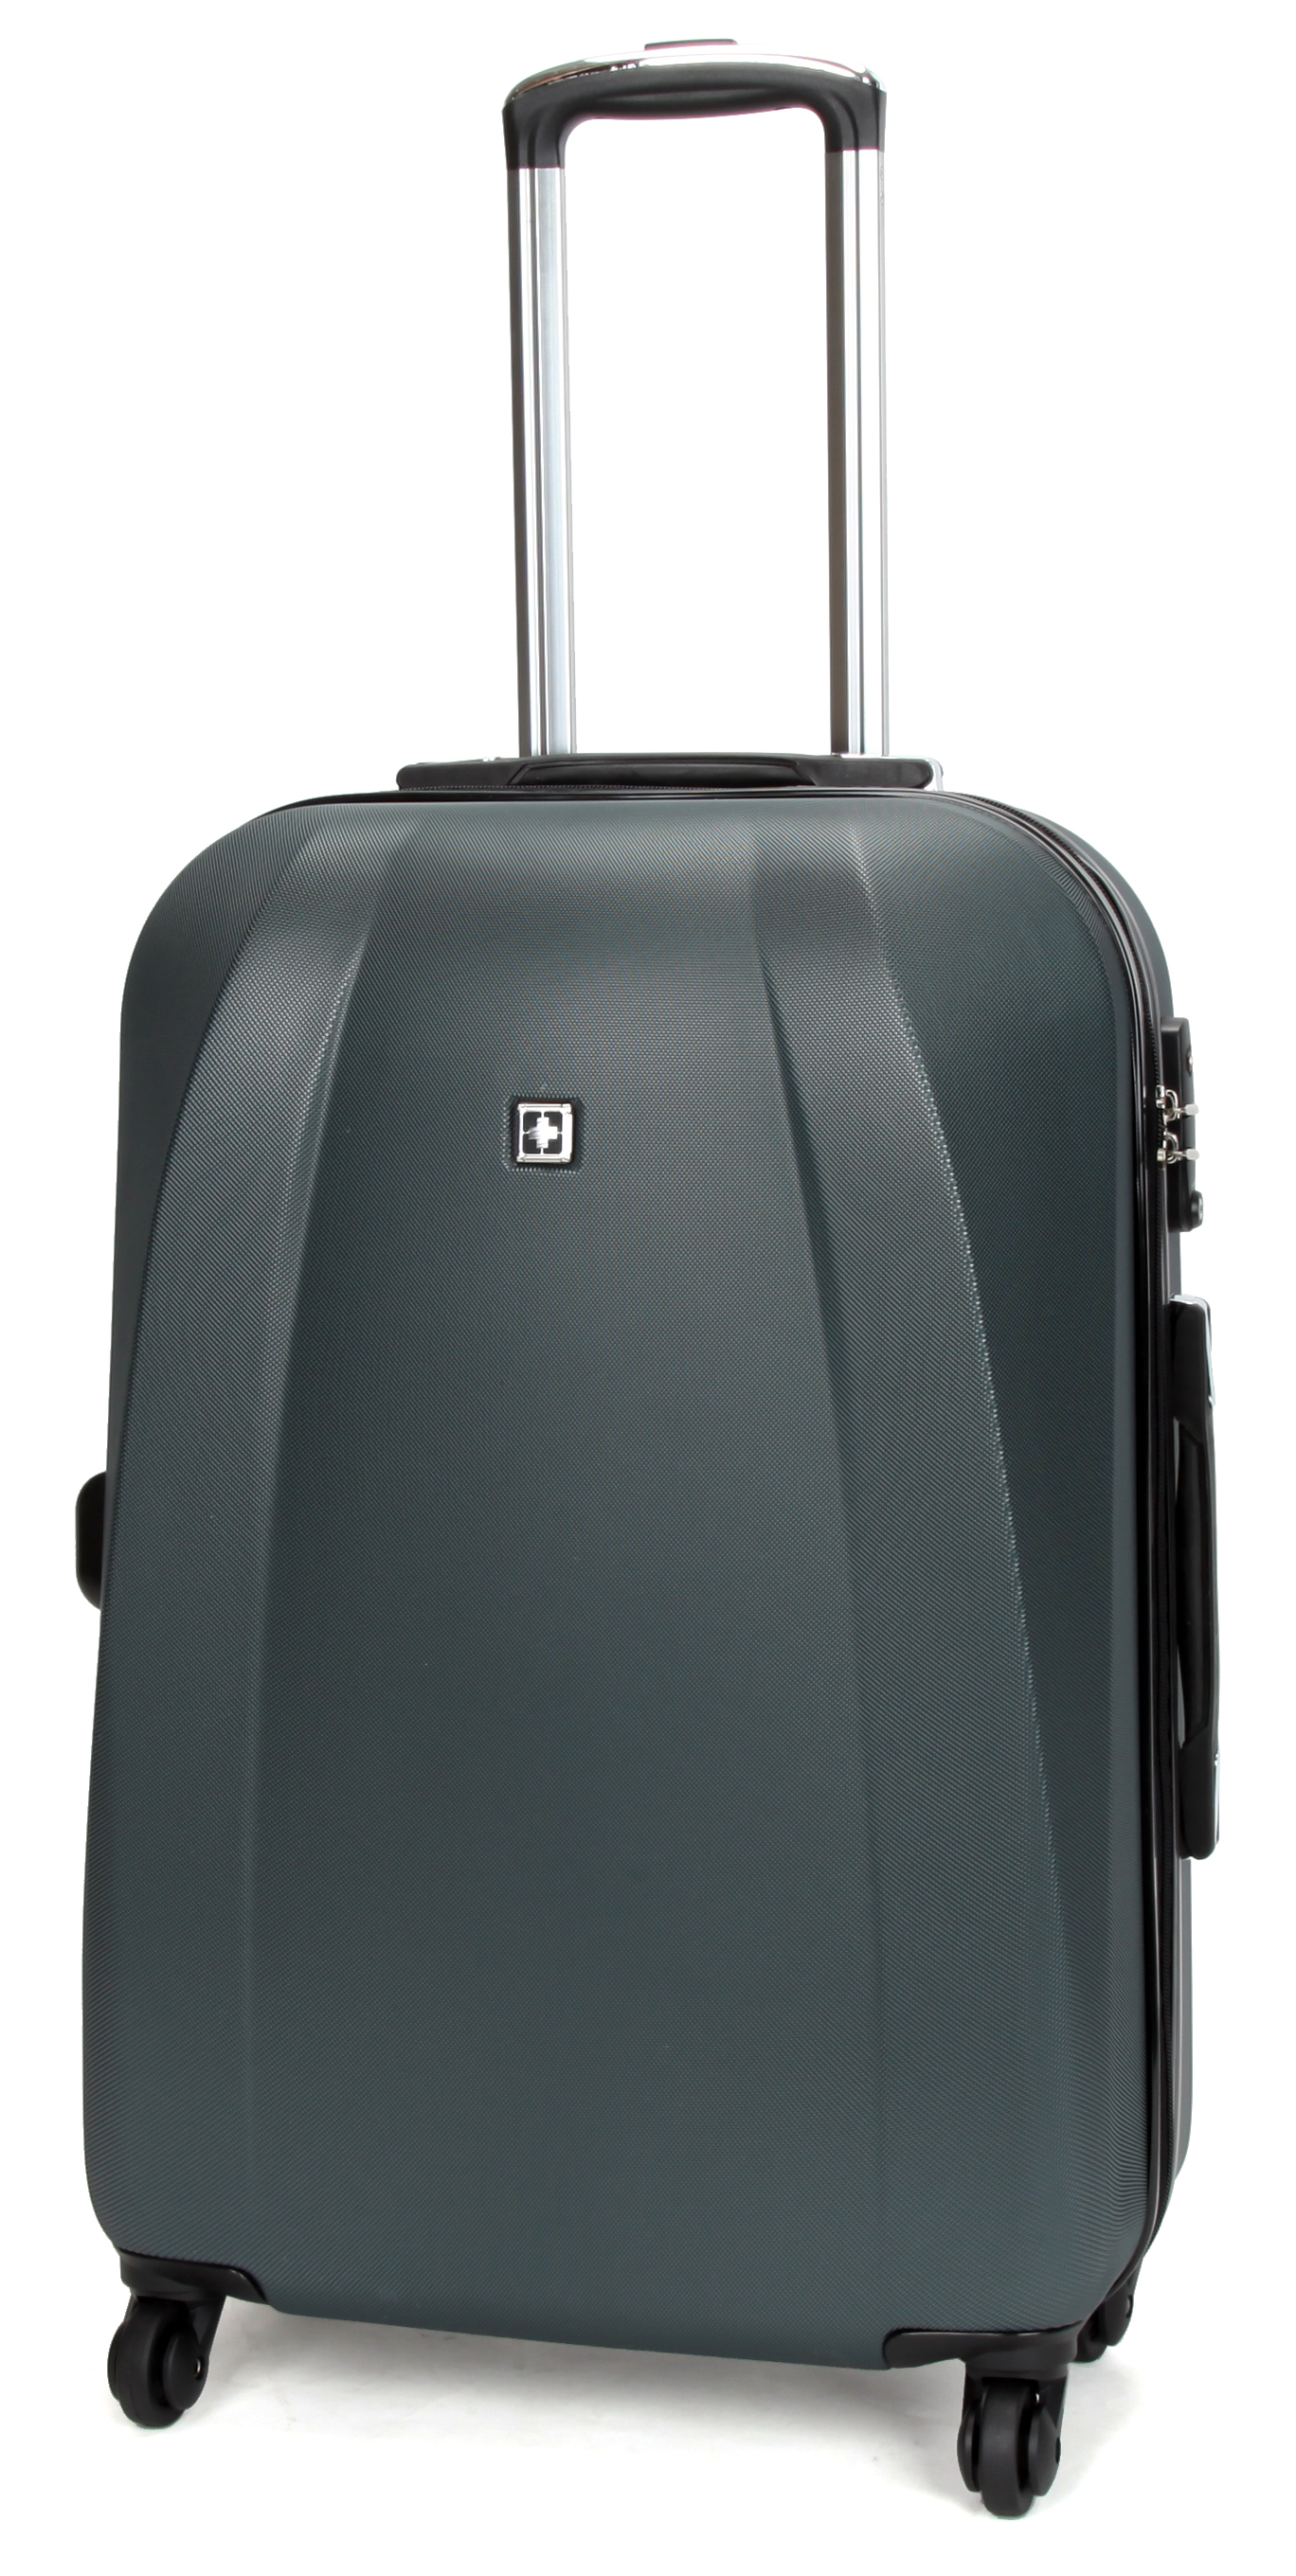 Business Leisure Campus Luggage